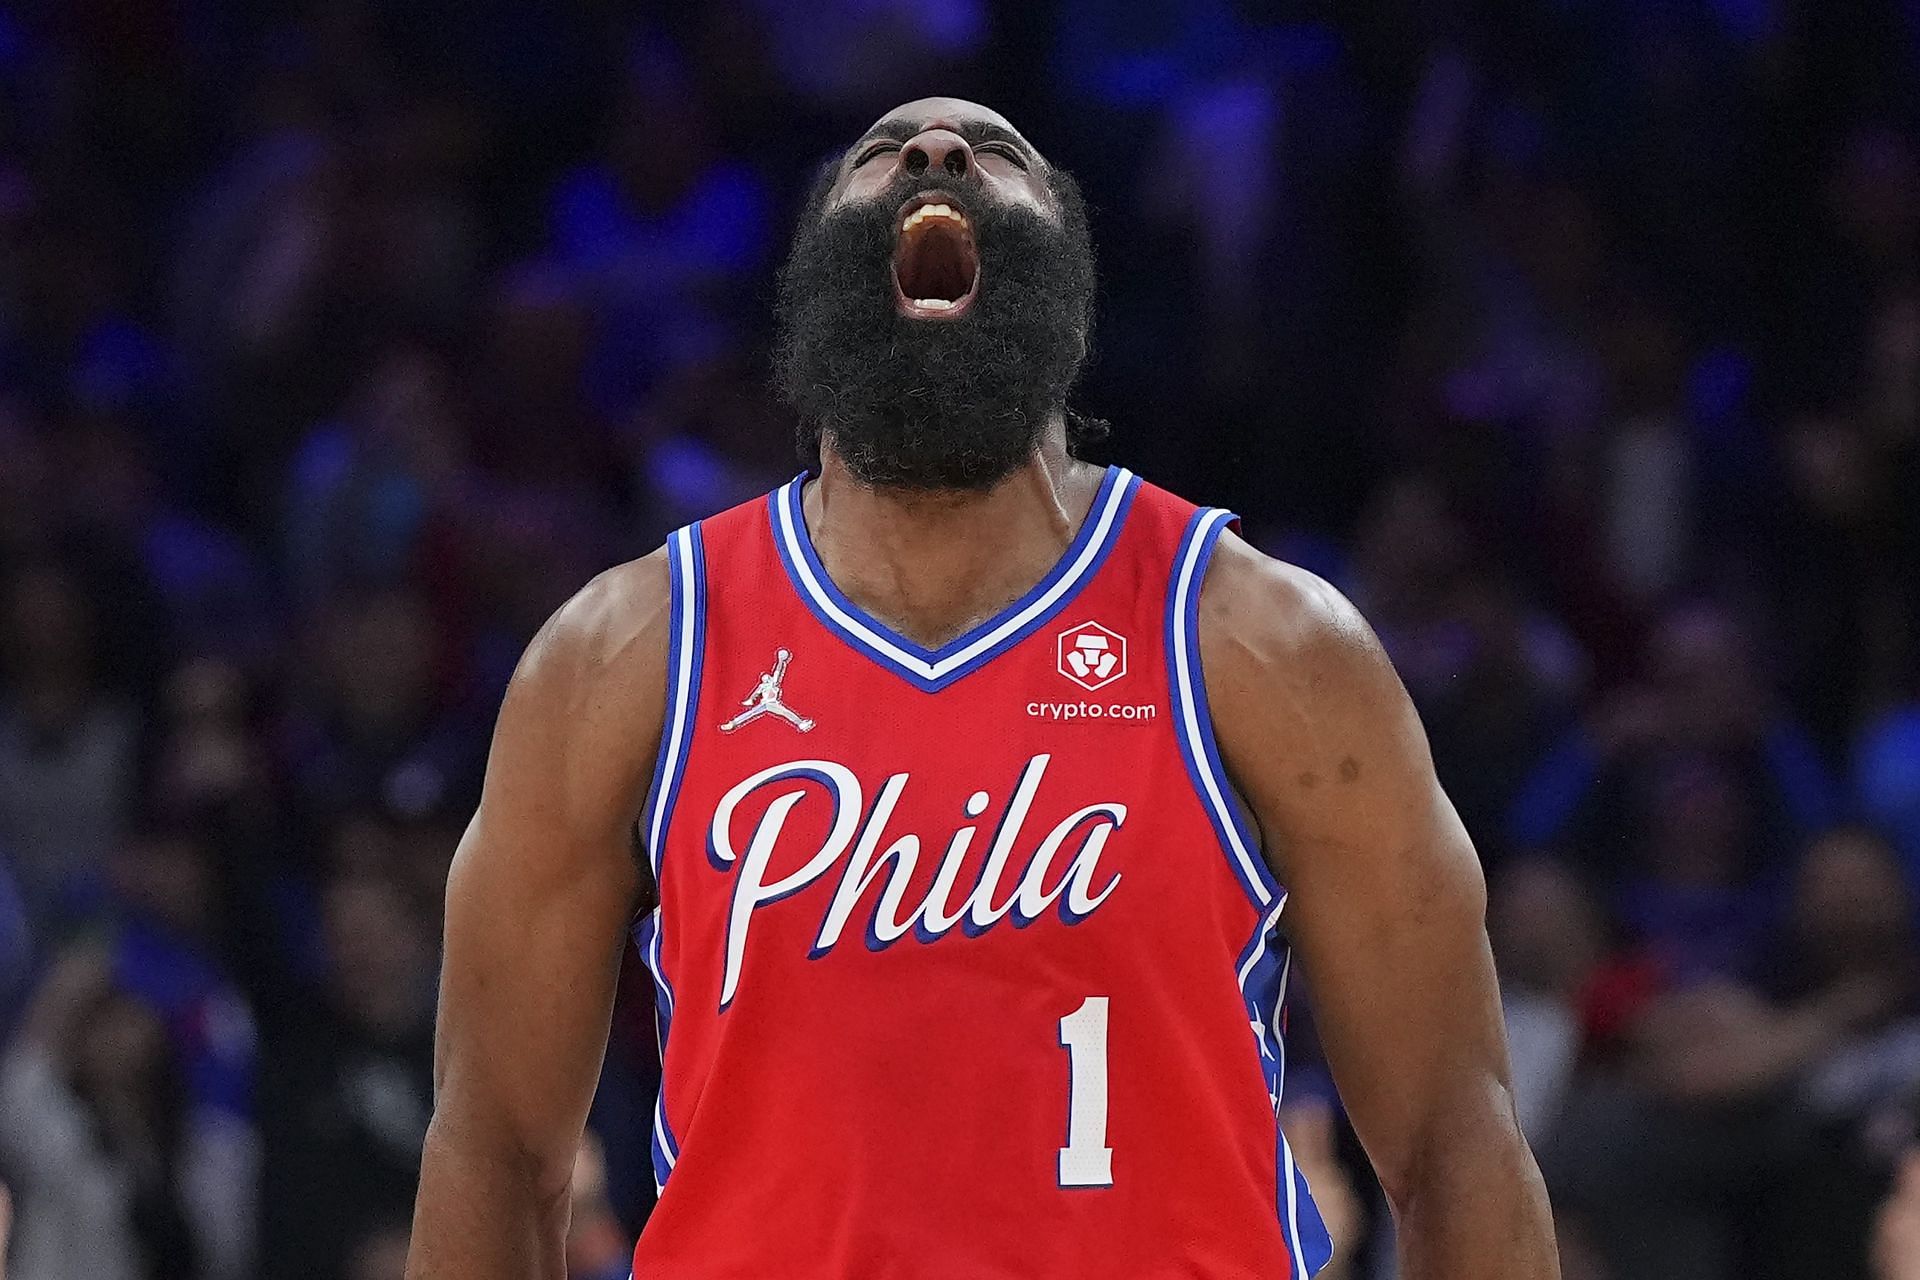 James Harden went berserk in the fourth quarter to push the 76ers past the Heat.